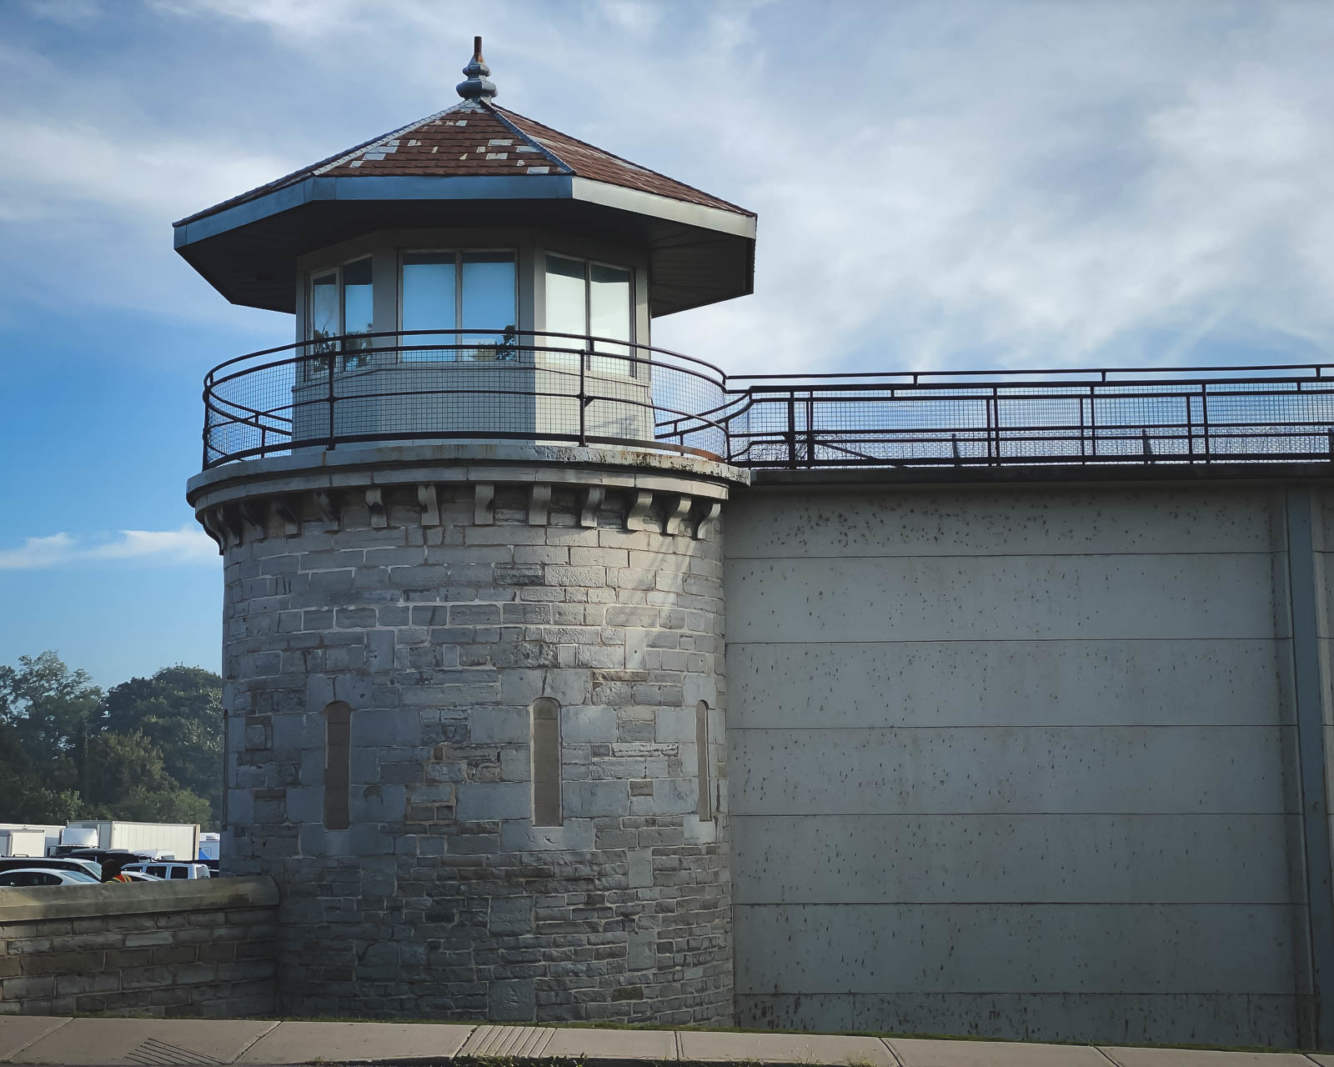 kingston penitentiary lookout tower